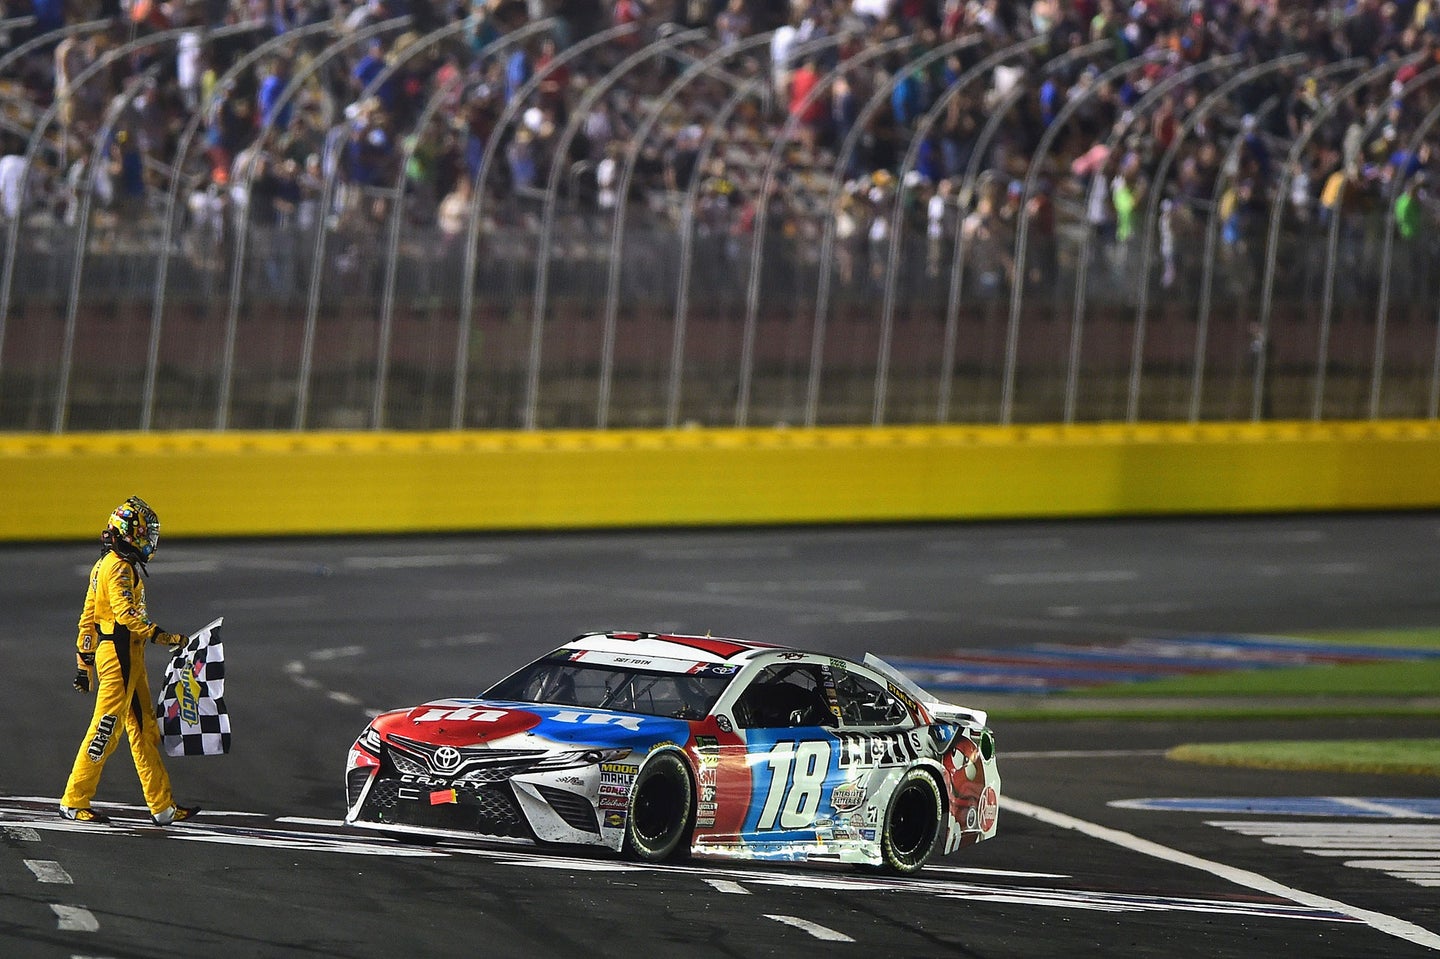 Kyle Busch Takes First NASCAR Cup Series Charlotte Win at Coca-Cola 600